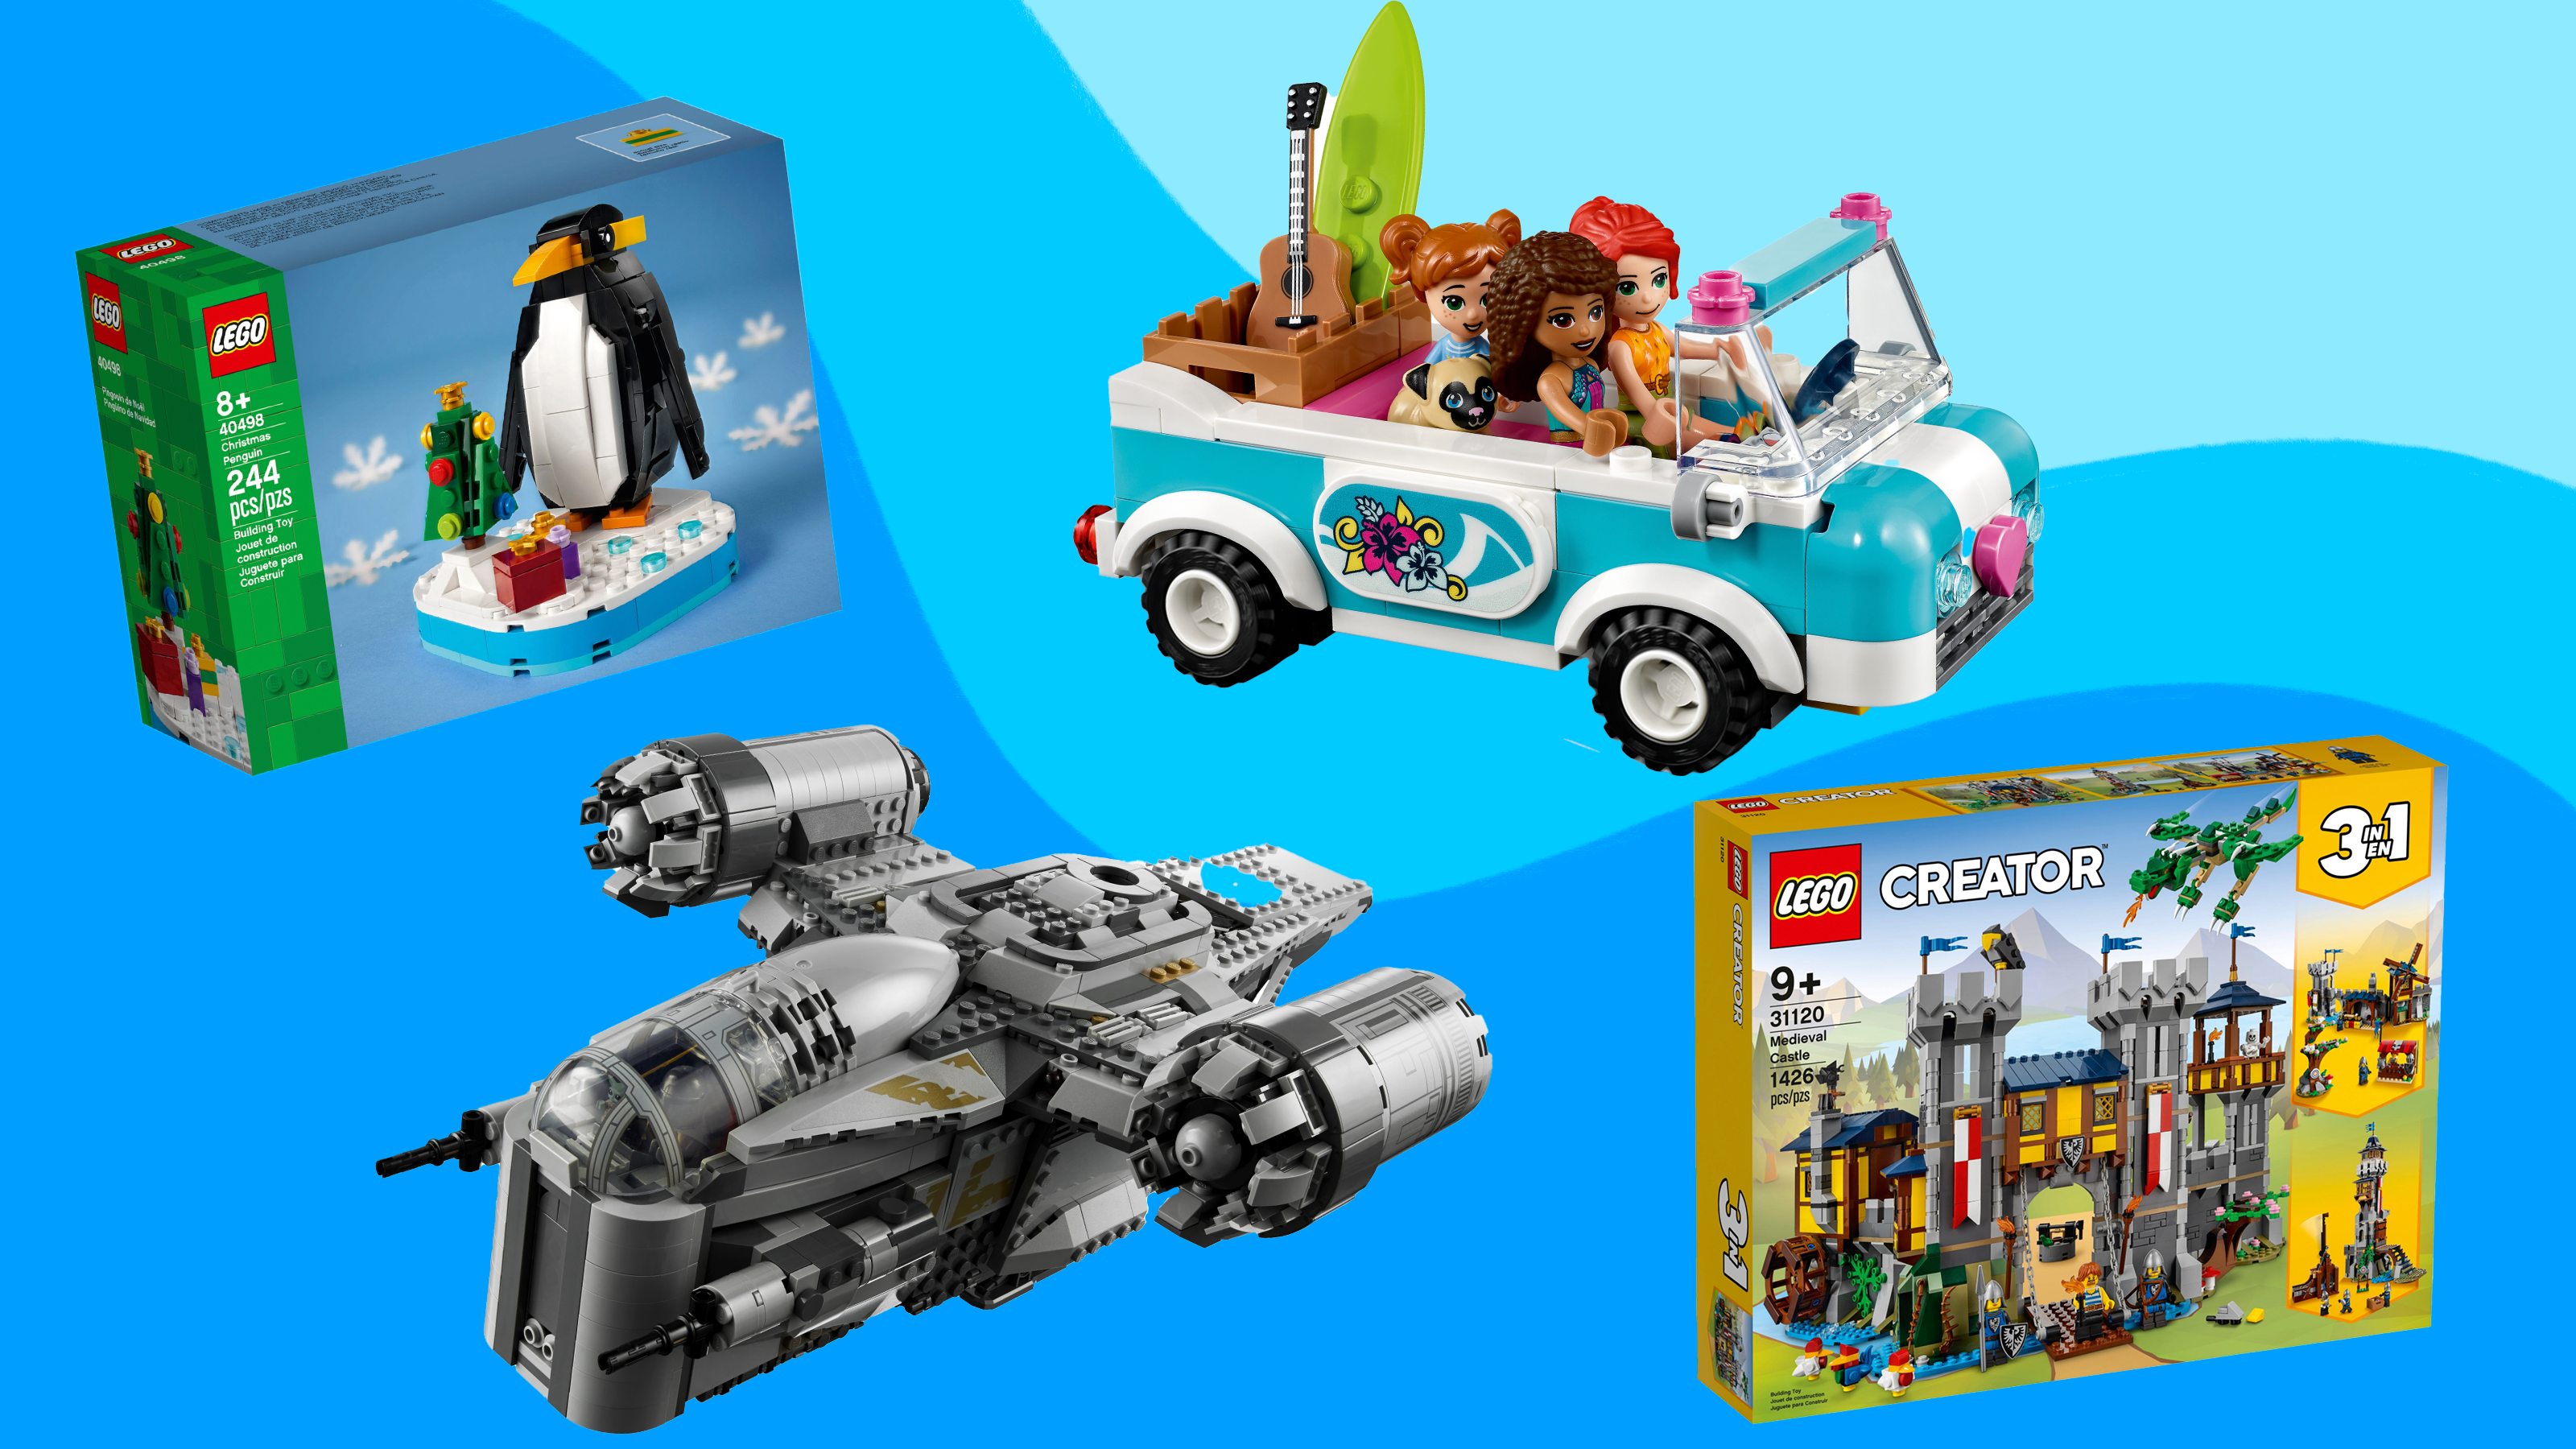 Motley protein tank Best Lego sets for kids: Star Wars, Mario, Harry Potter